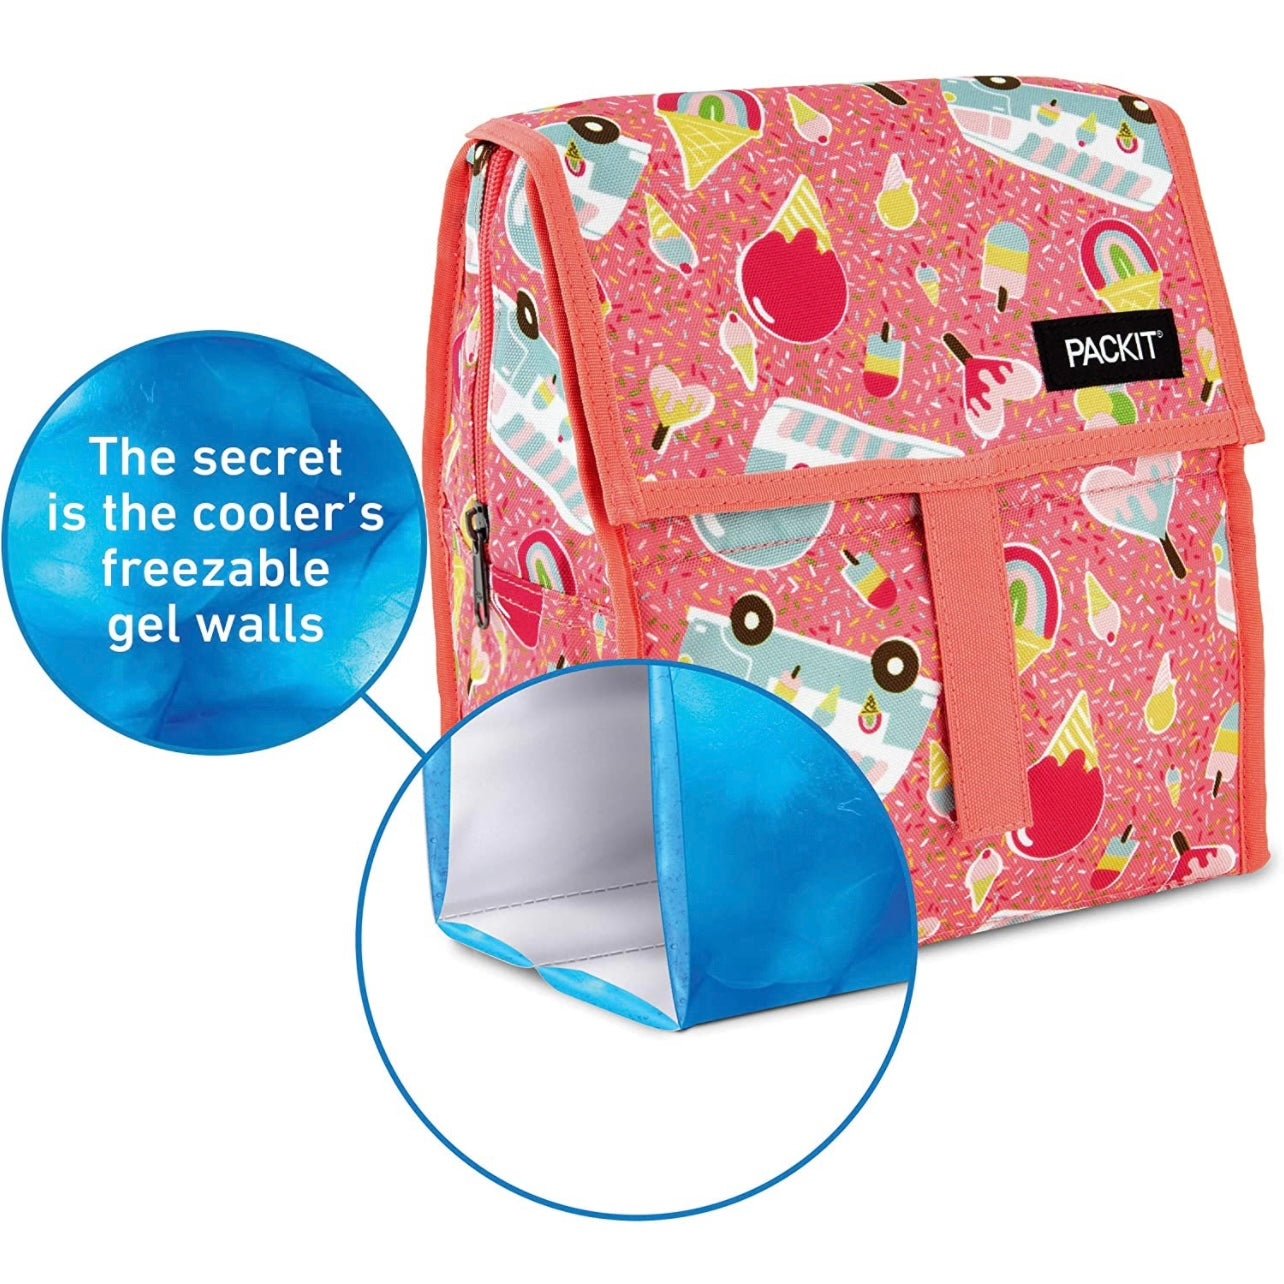 Freezable Lunch Boxes  Shop Freezable Lunch Bags and Lunch Boxes